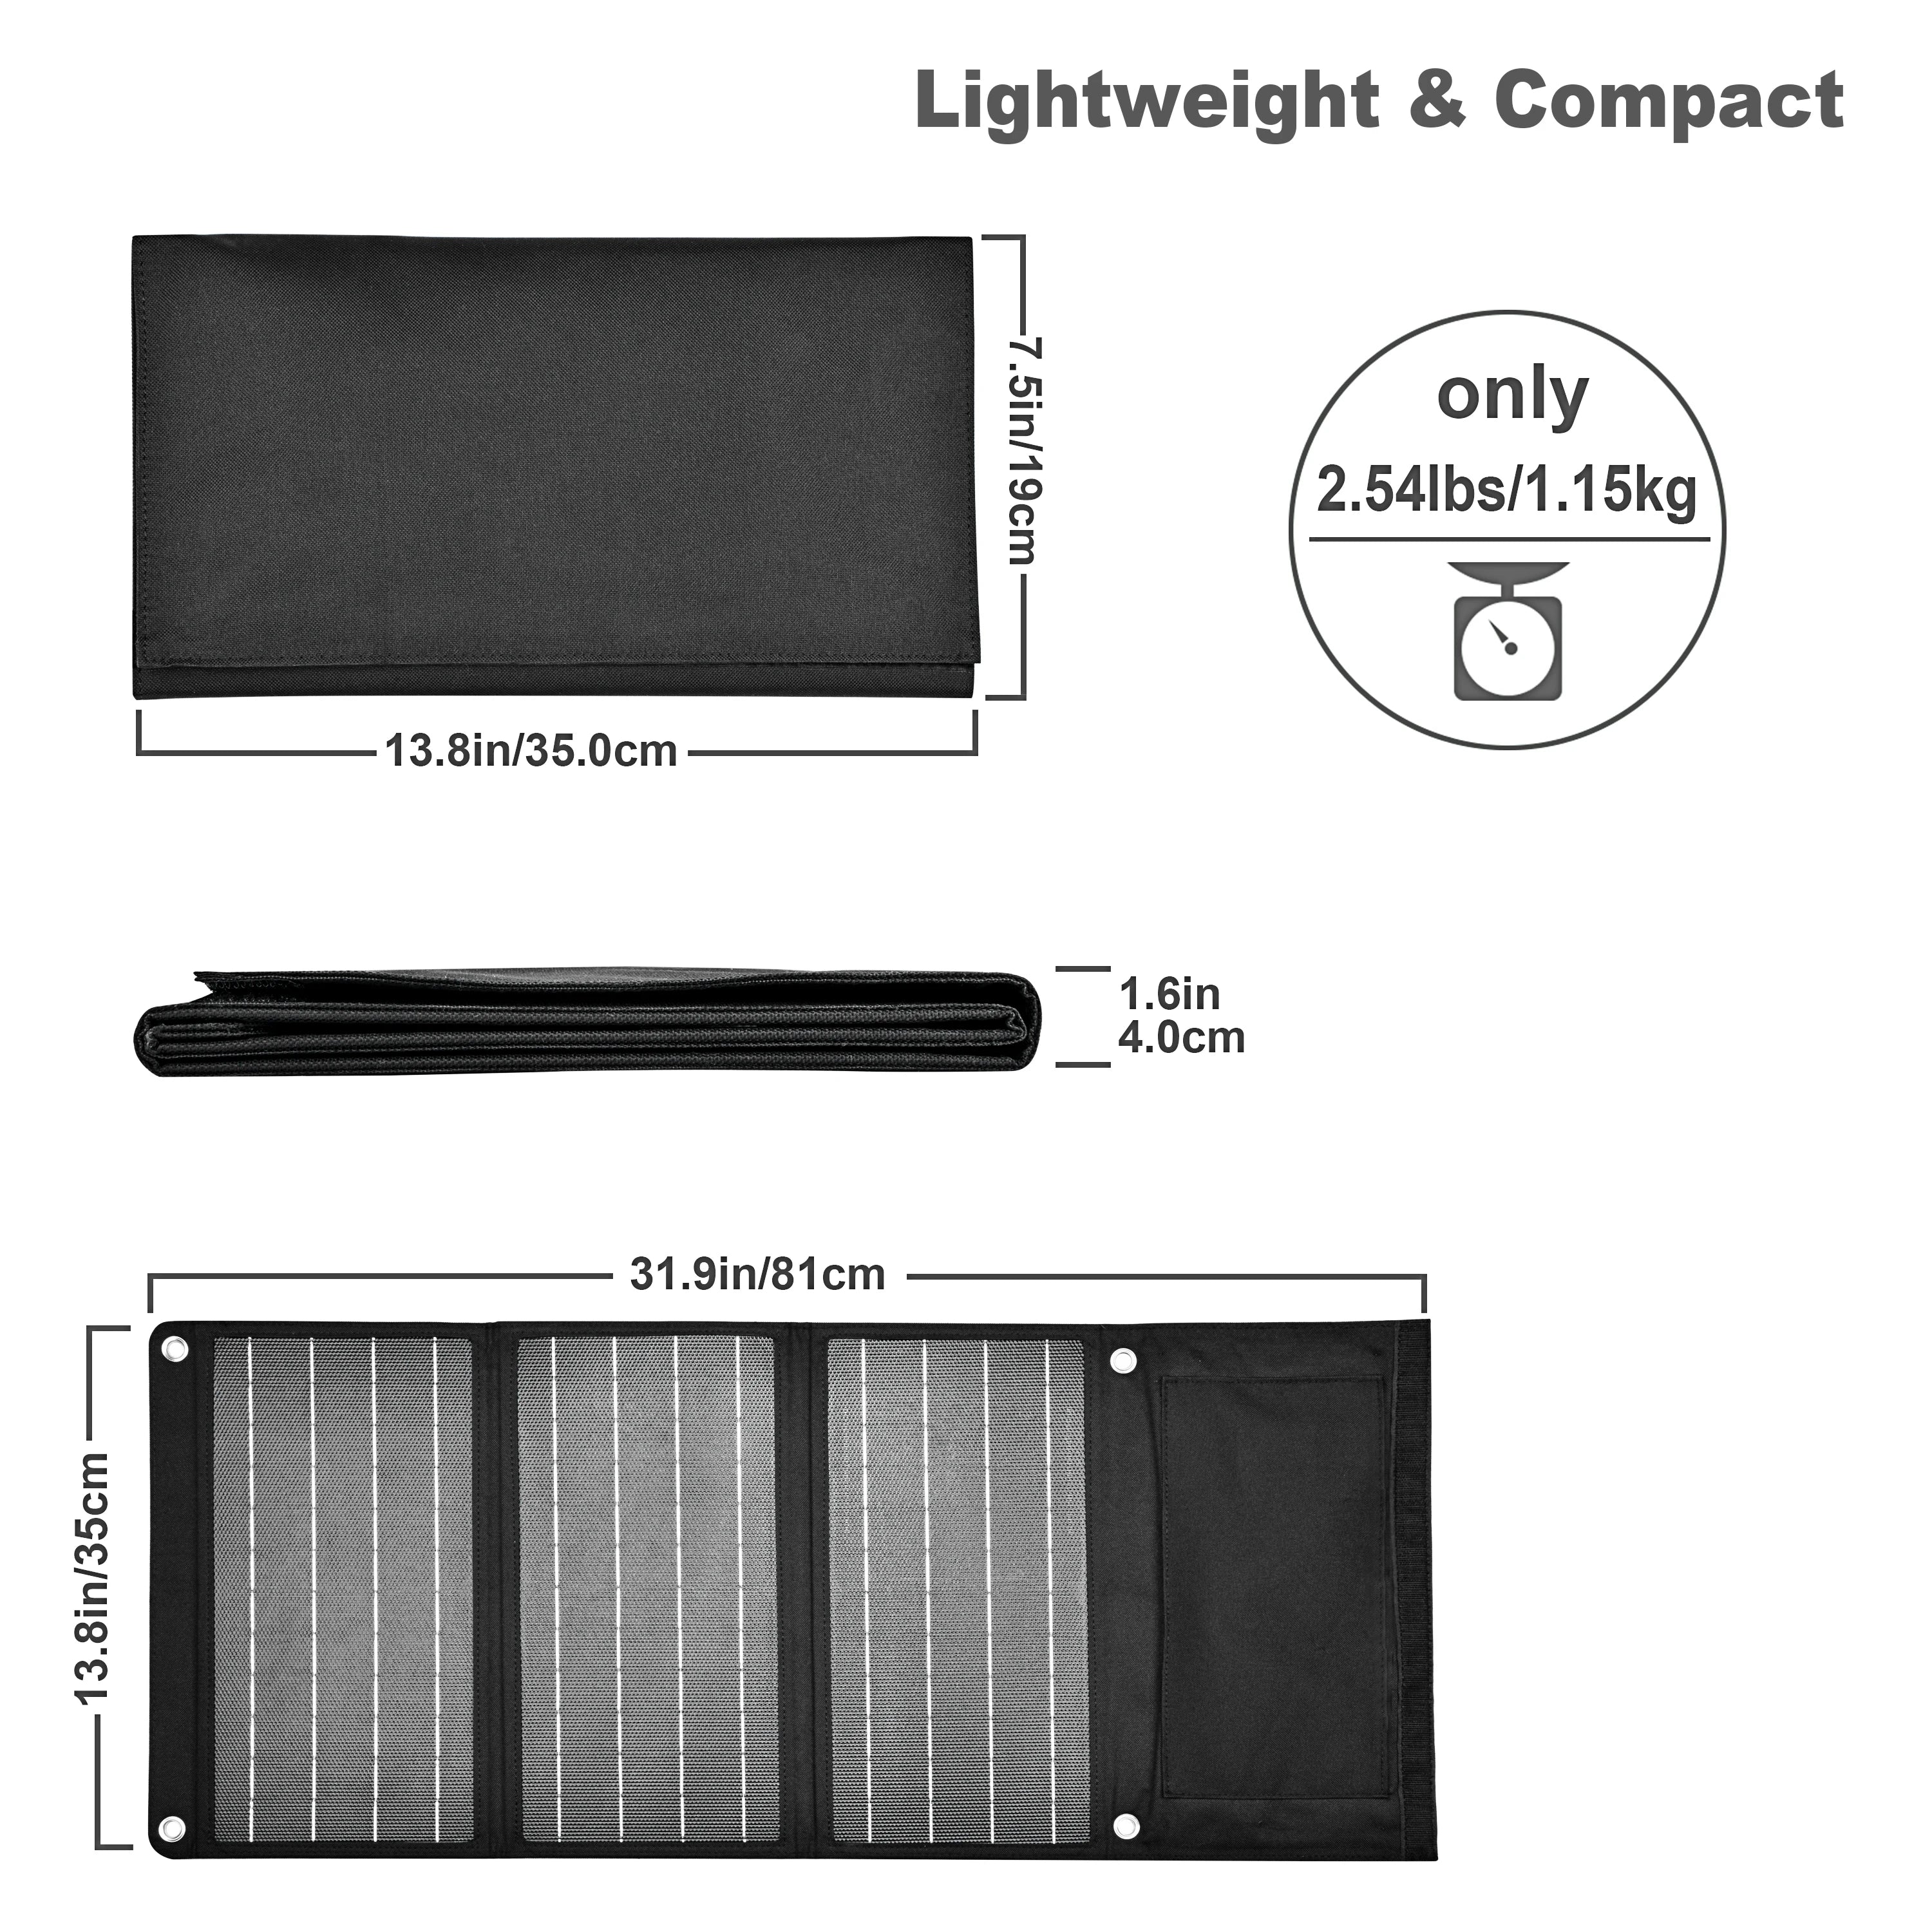 30W Portable Solar Panel, Portable solar panel weighs 2.54lbs, measures 13.8x4x0.6 inches, easy to carry.